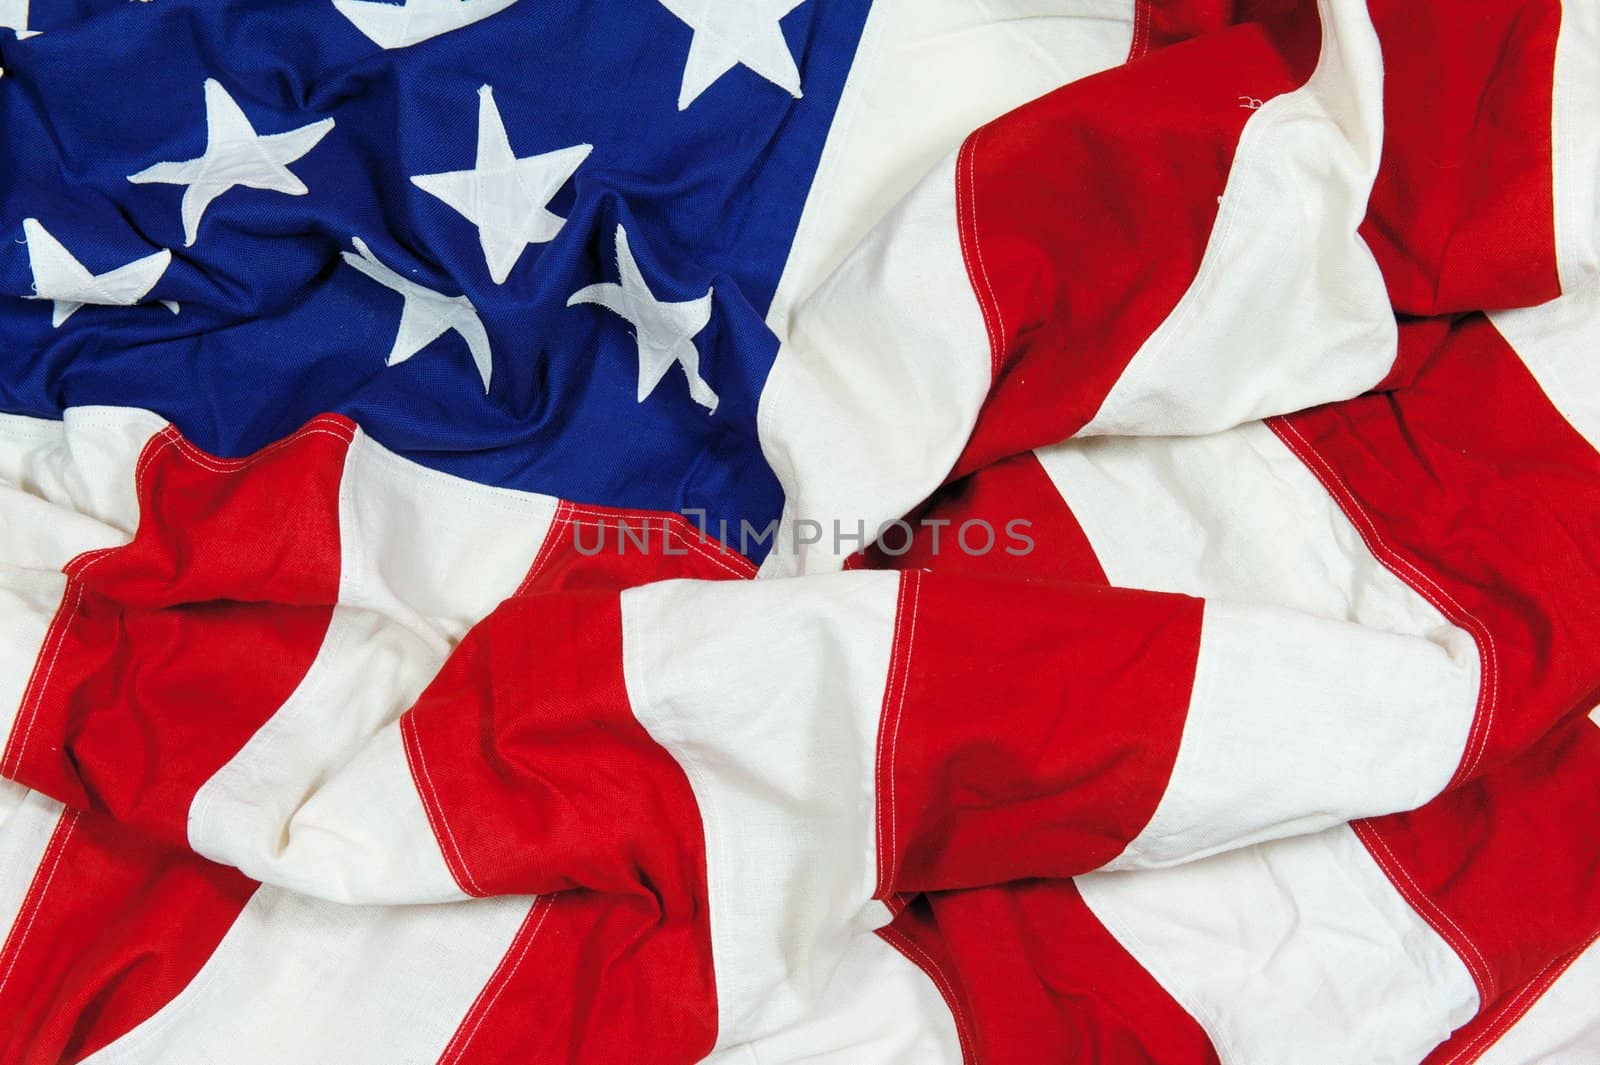 A crumpled and wrinkled flag of the United States of America